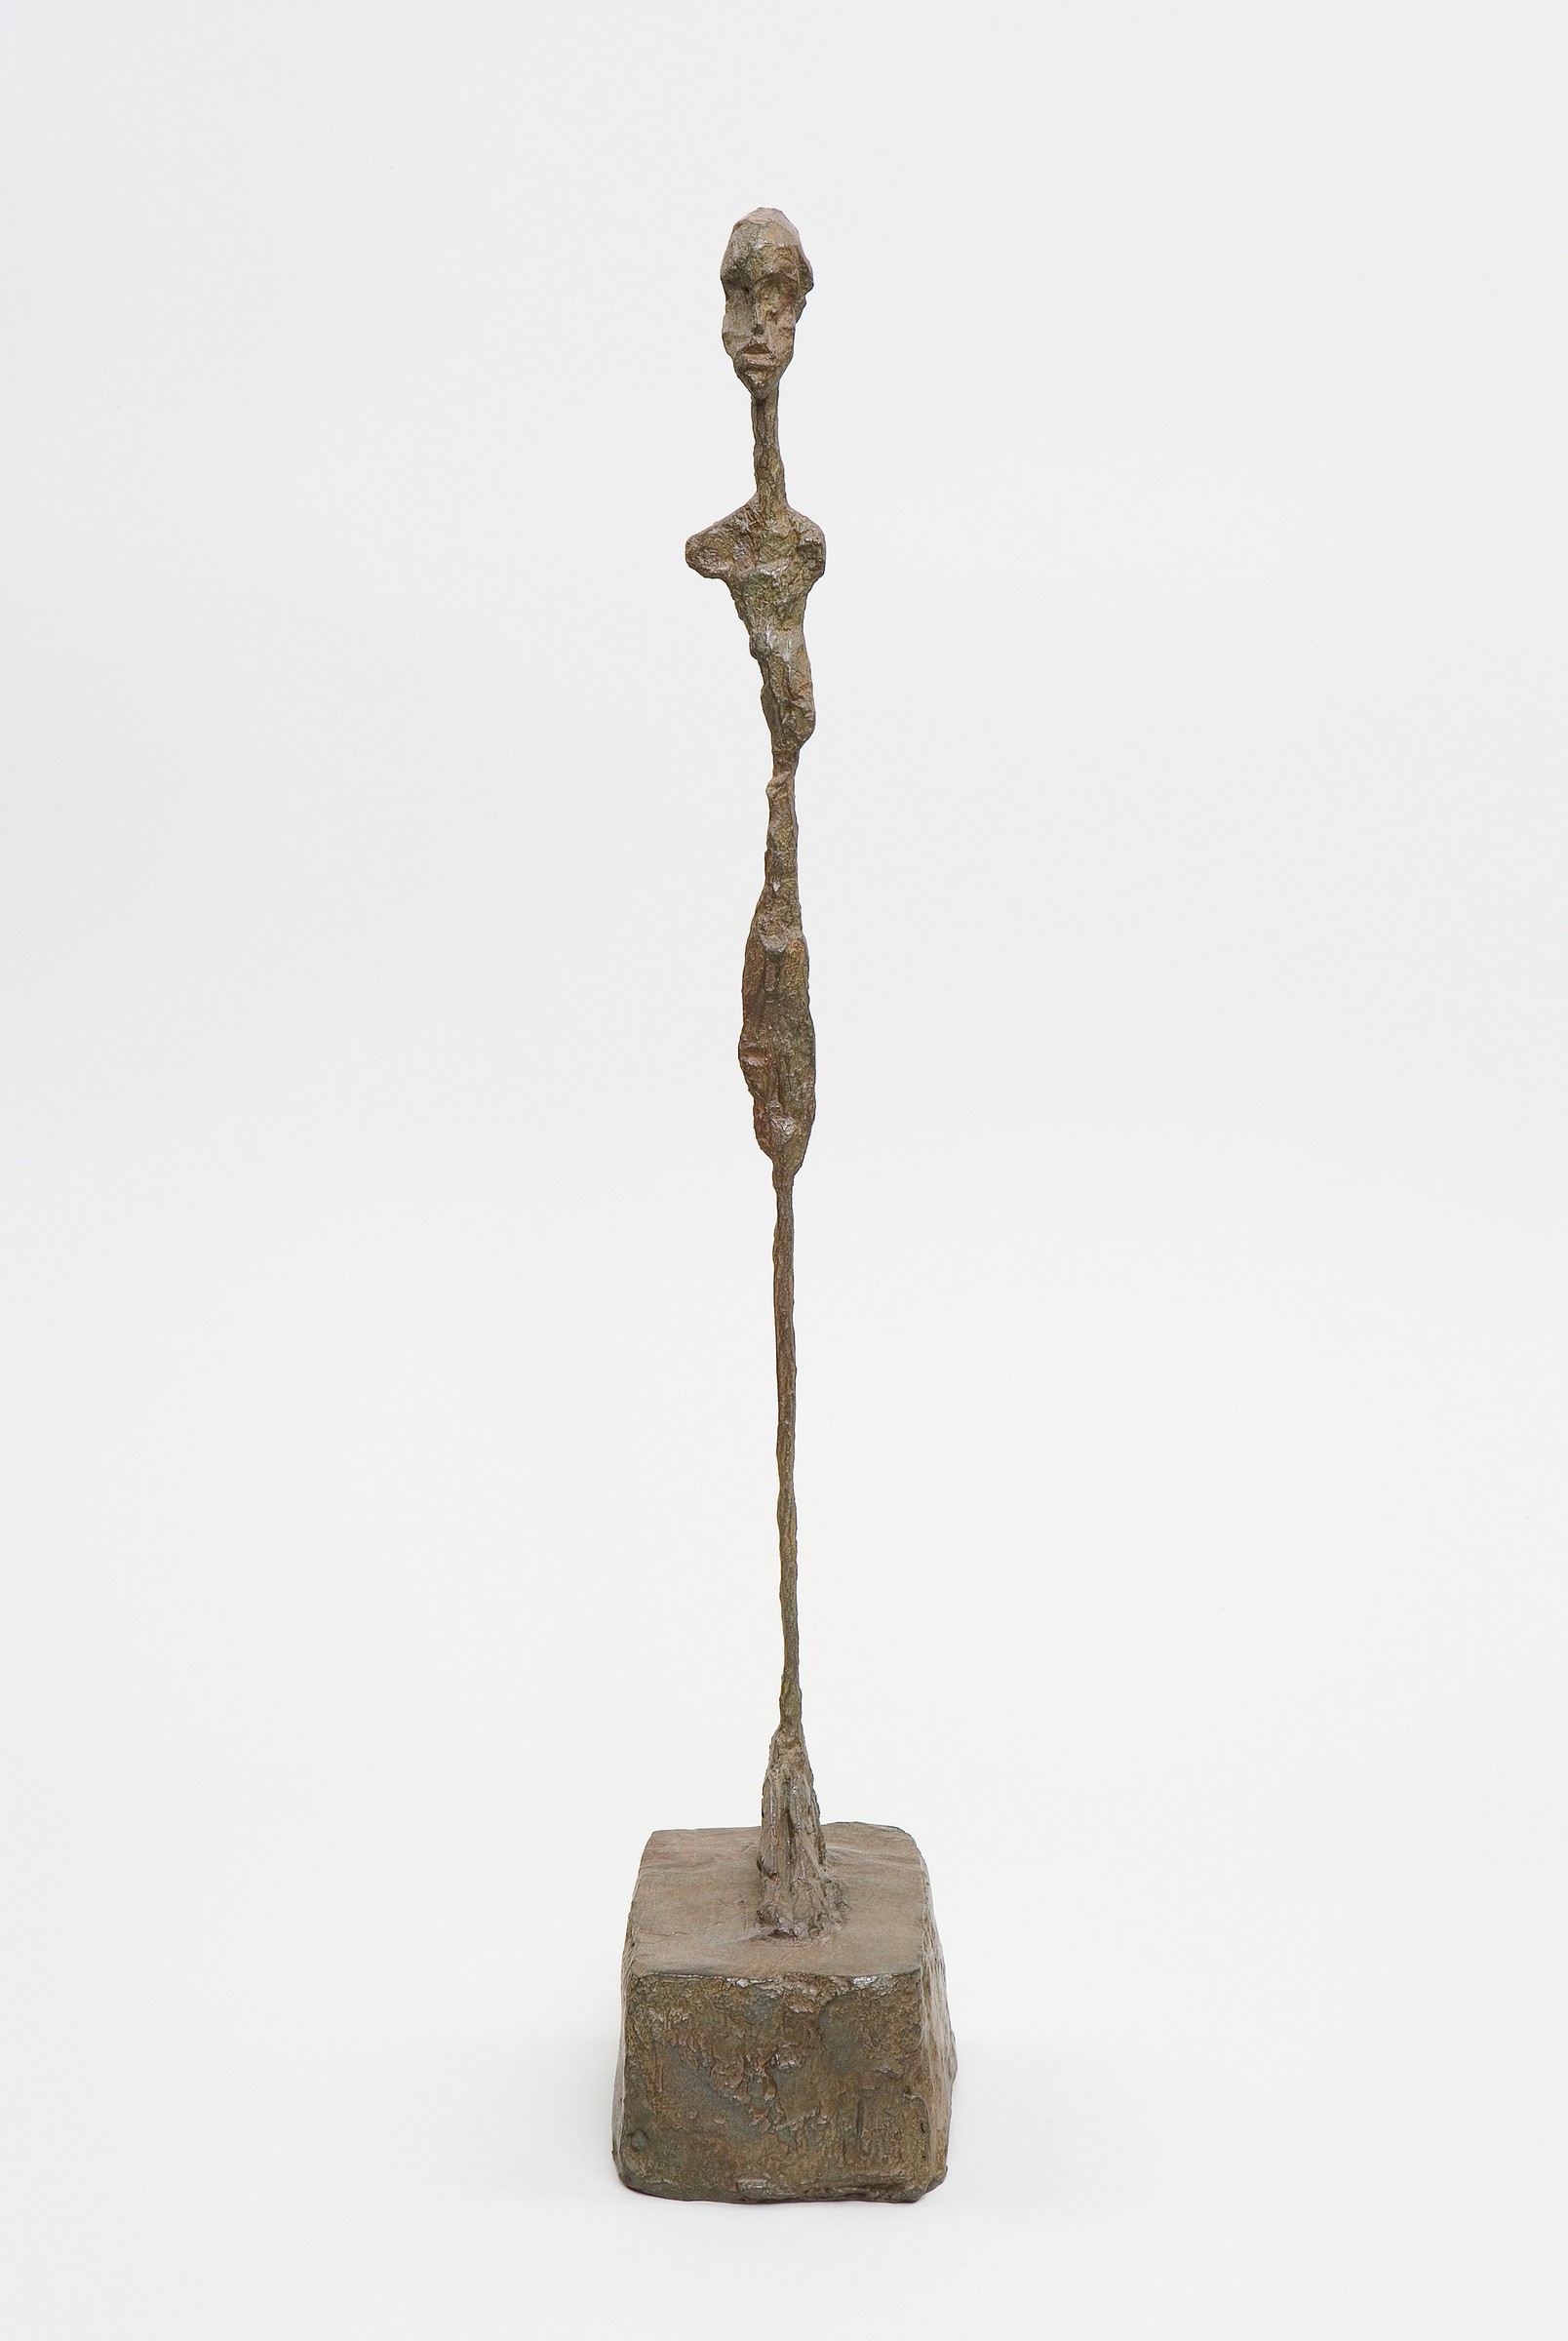 Giacometti: Without End, Hong Kong, March 13–May 31, 2014 | Gagosian